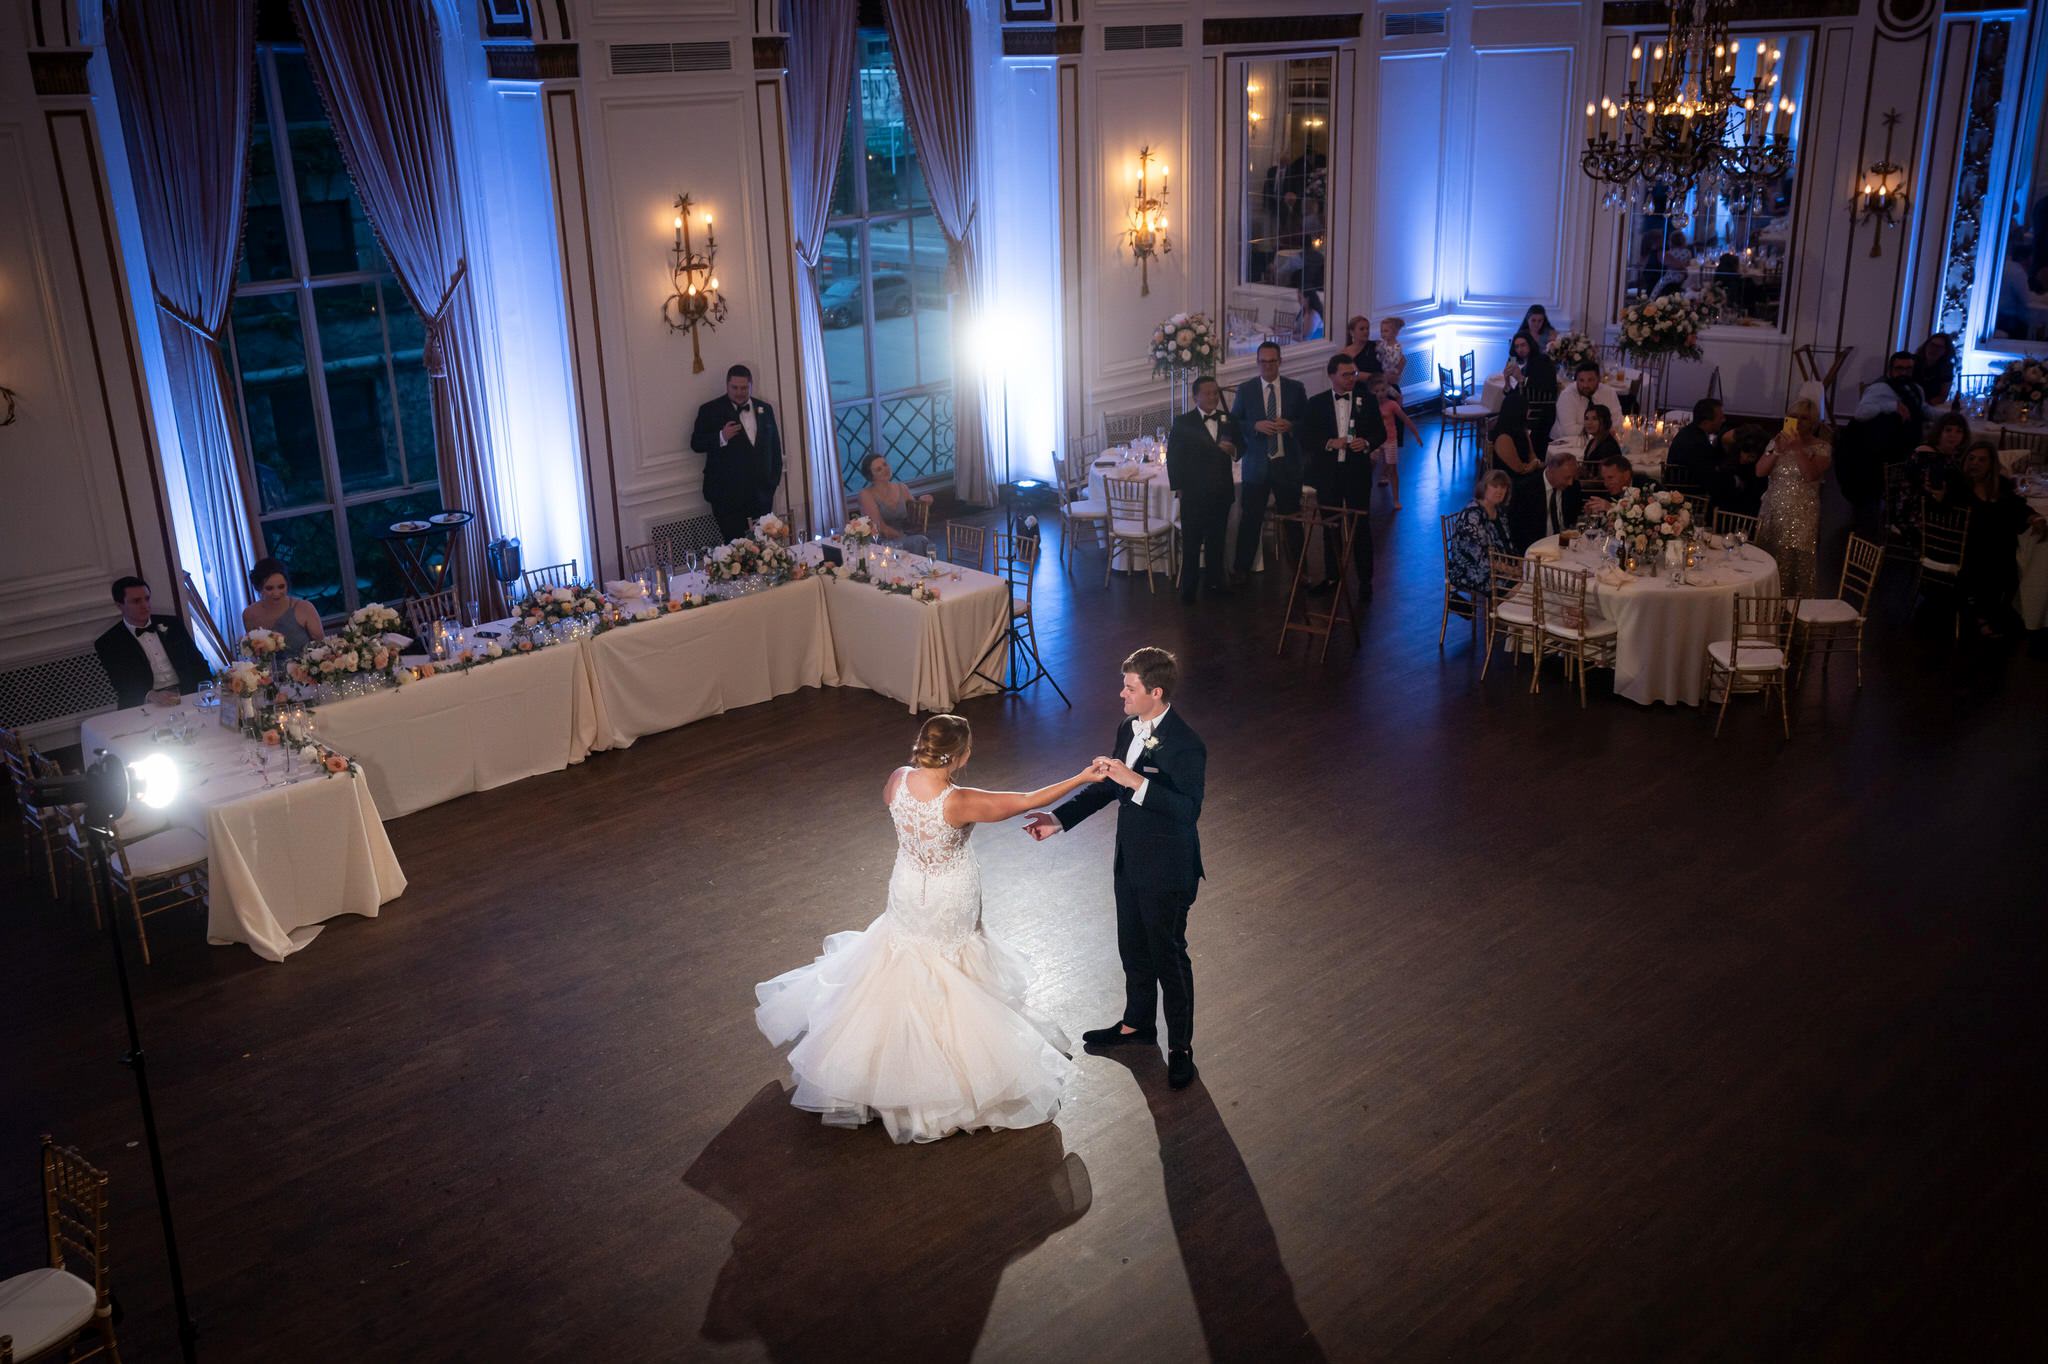 A bride and groom dance in a colorful ballroom at Forbes Hospitality Colony Club.